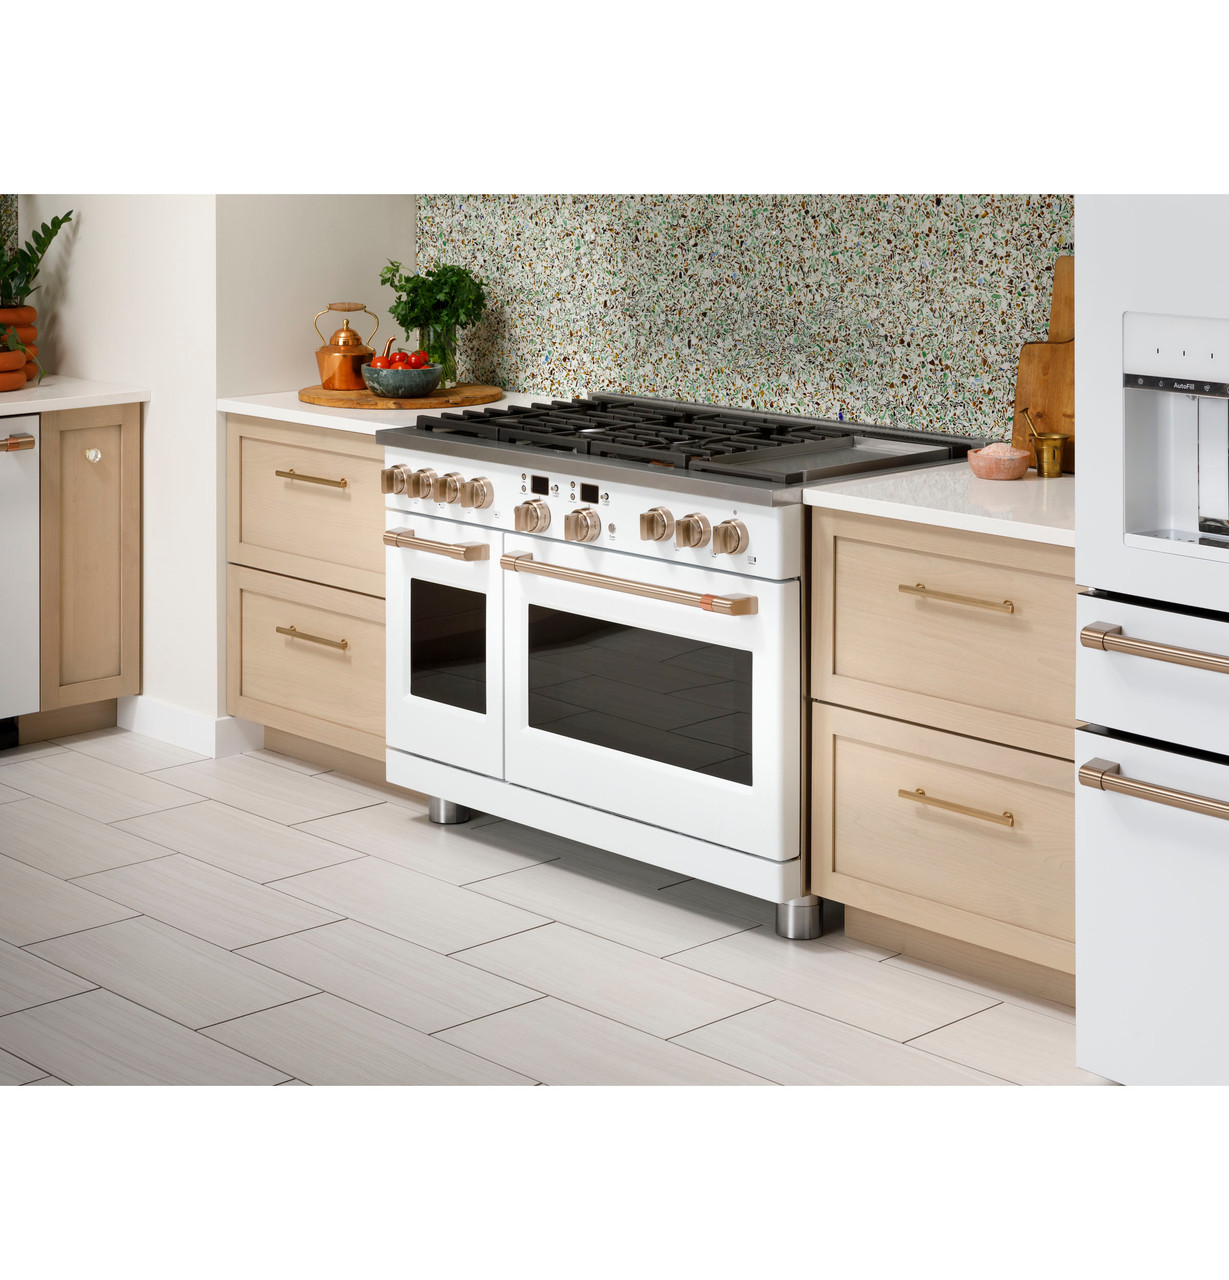 Café™ 48 Smart Dual-Fuel Commercial-Style Range with 6 Burners and Griddle  (Natural Gas) - C2Y486P2TS1 - Cafe Appliances